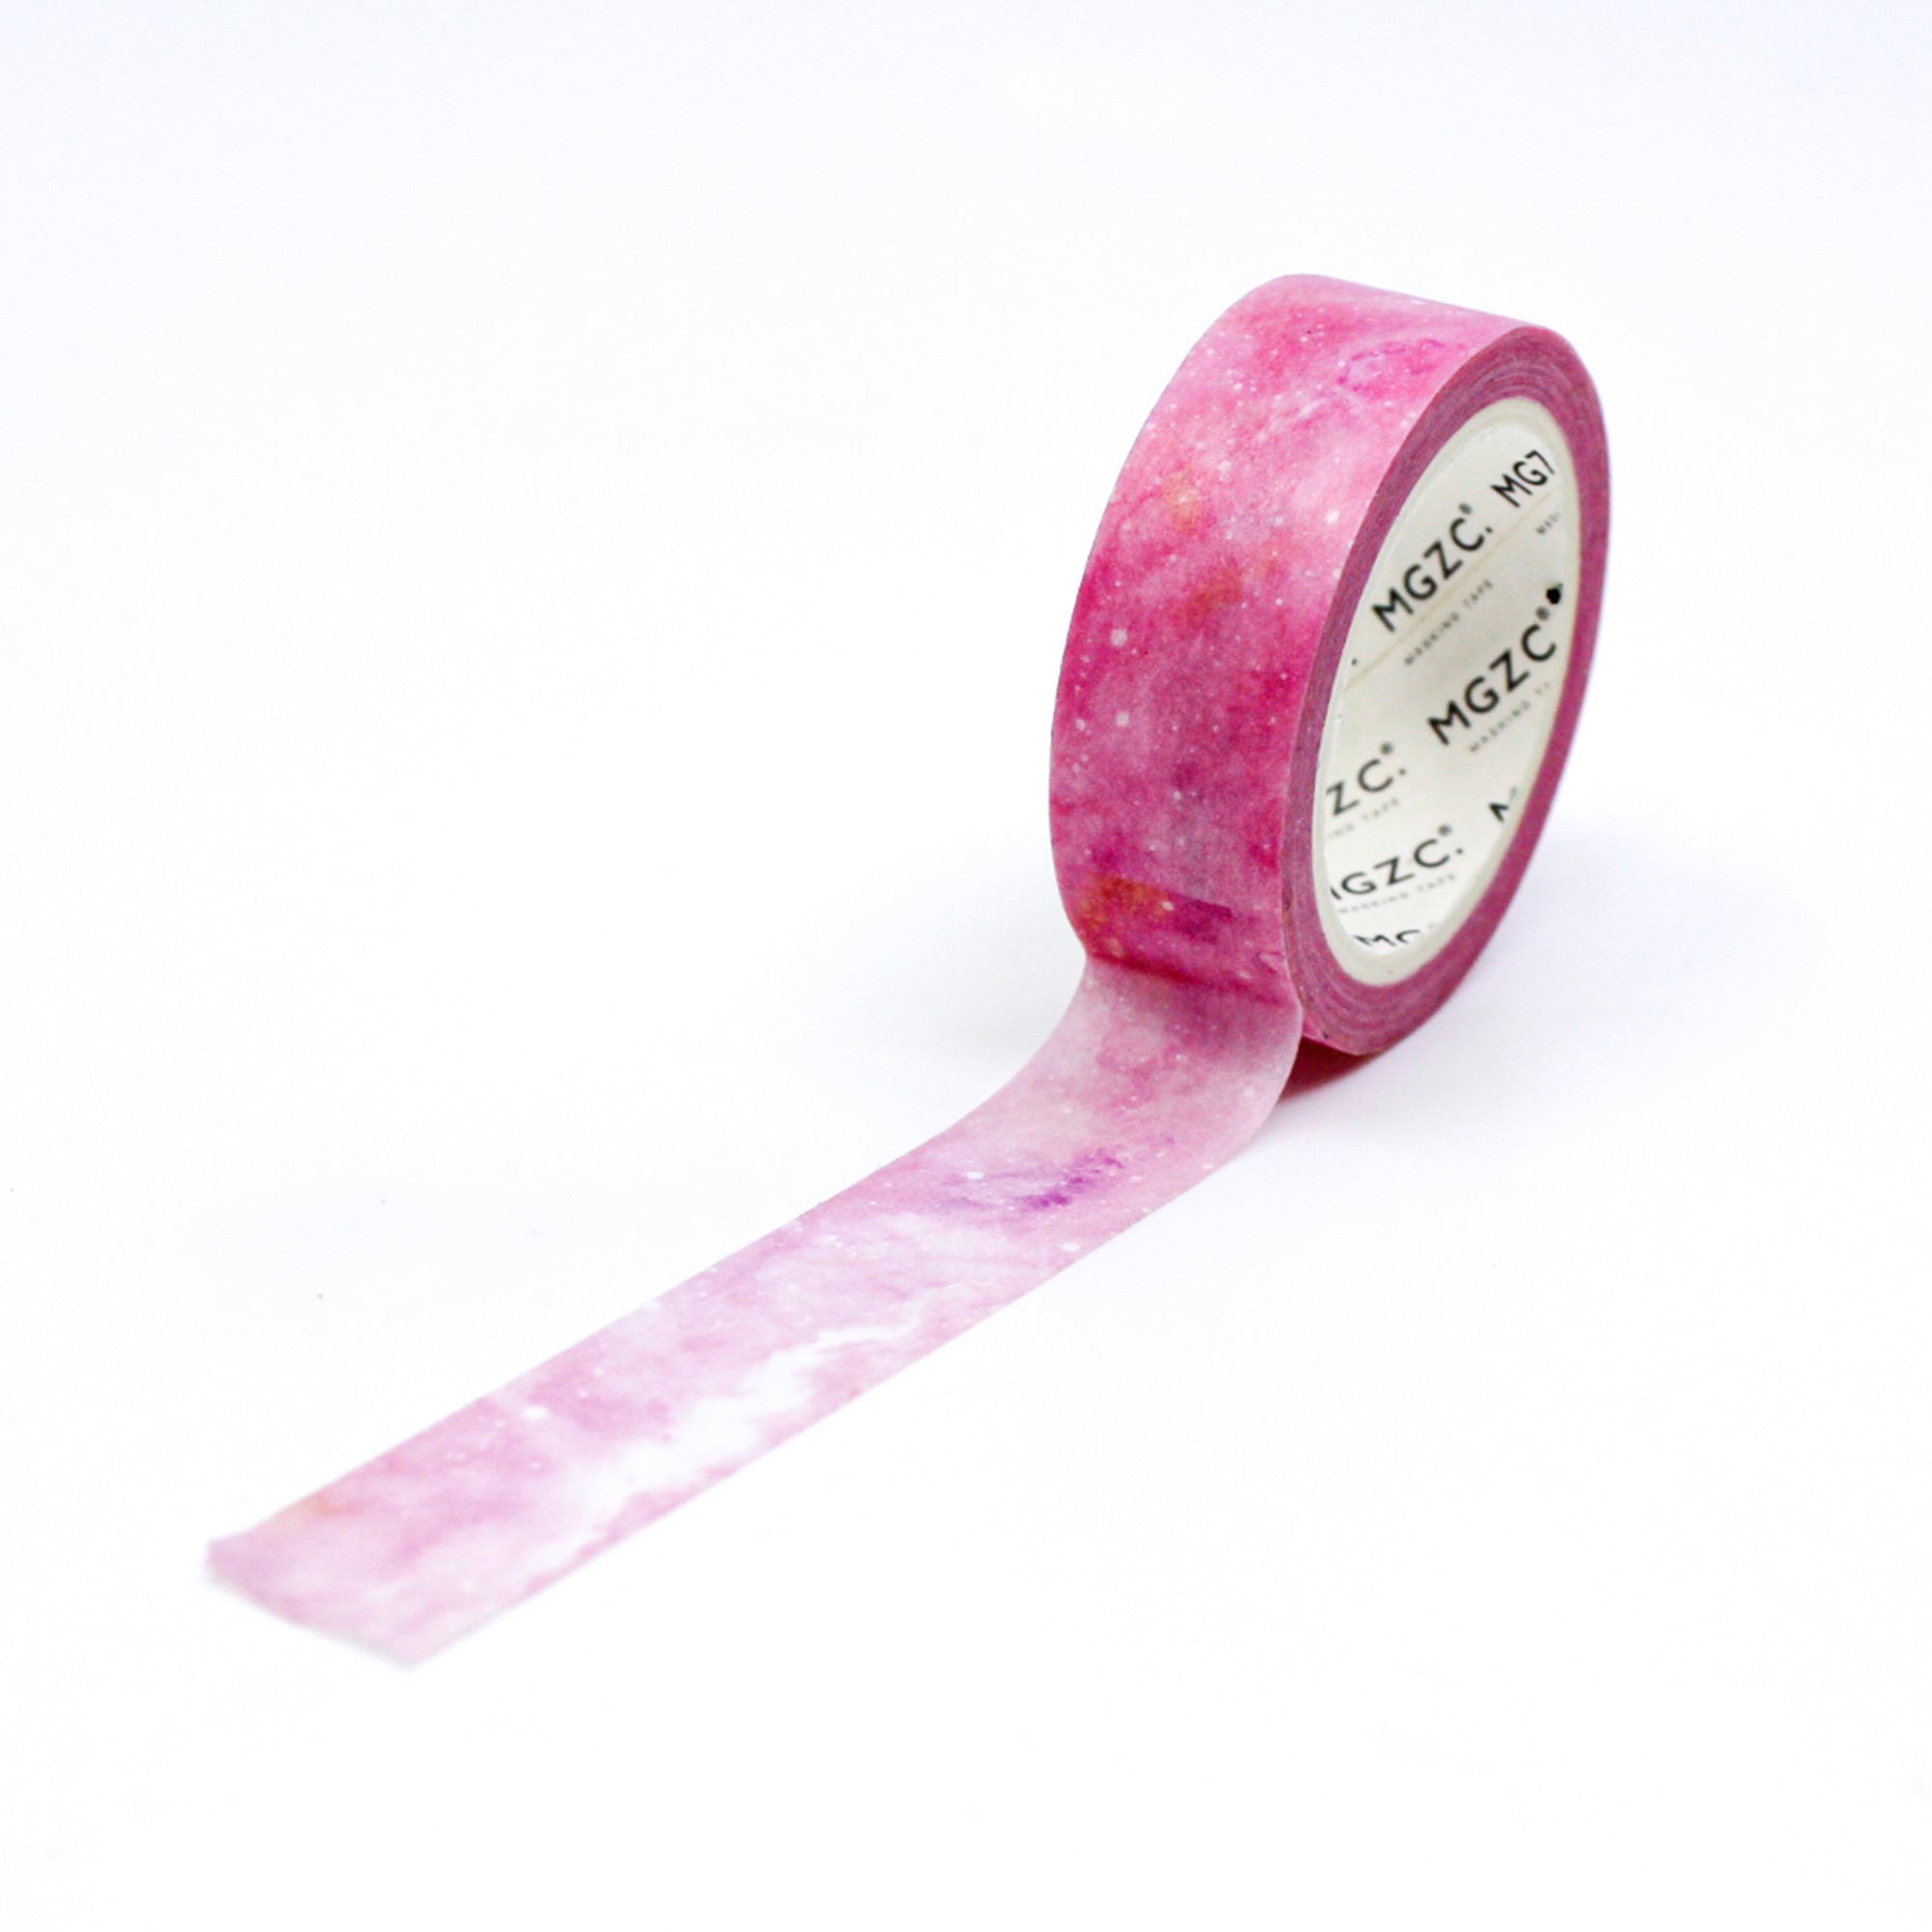 This pink sky watercolor washi tape is the perfect addition to your washi collection. The simplicity of the pattern is perfect for accenting and matching any project's theme while adding a beautiful and interesting pattern. This tape is from BBB Supplies Craft Shop.